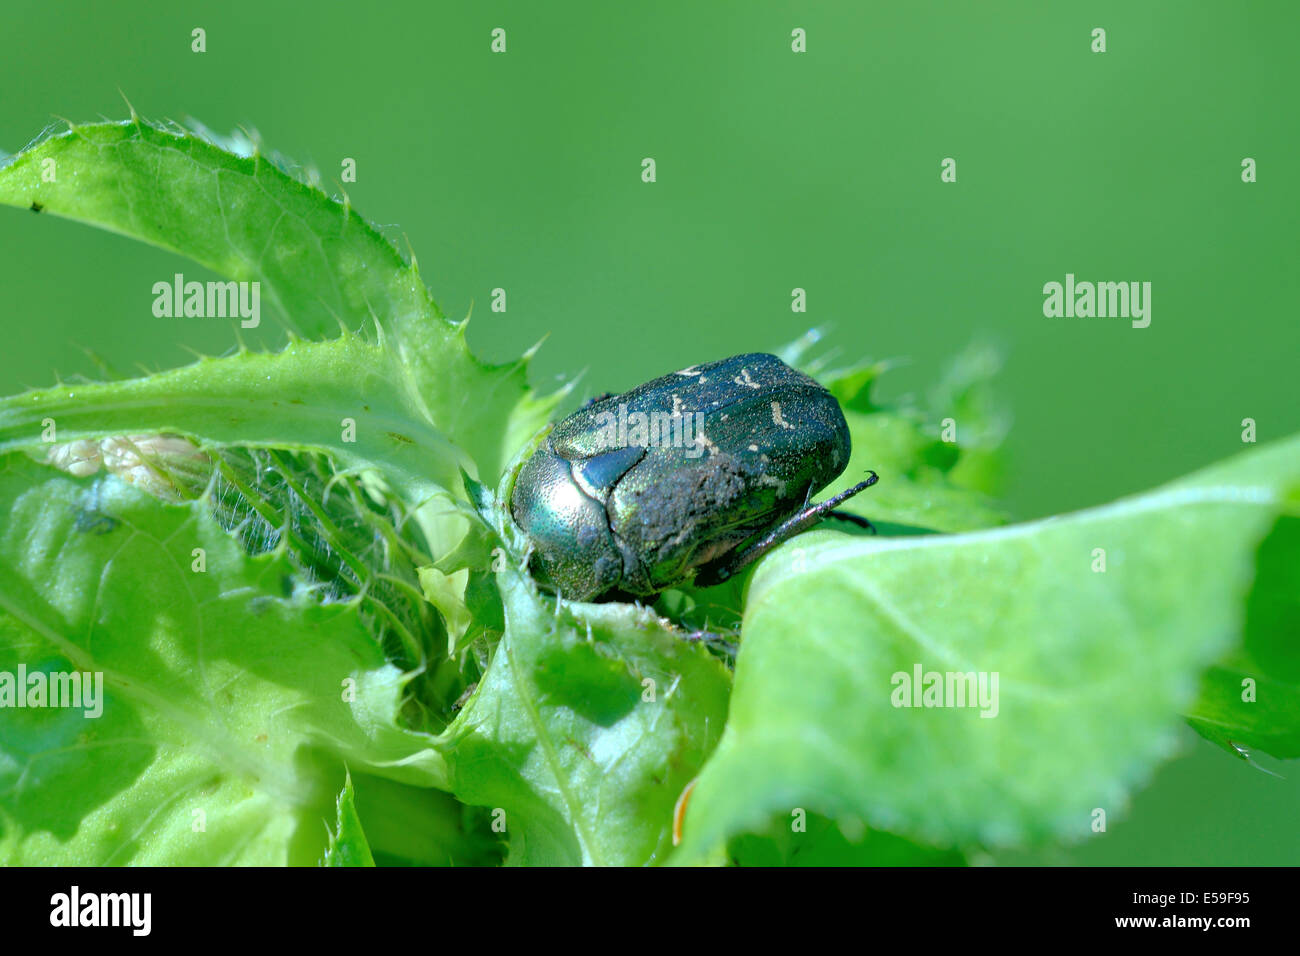 Rose chafer (Cetonia aurata)  climbing on a thistle Stock Photo